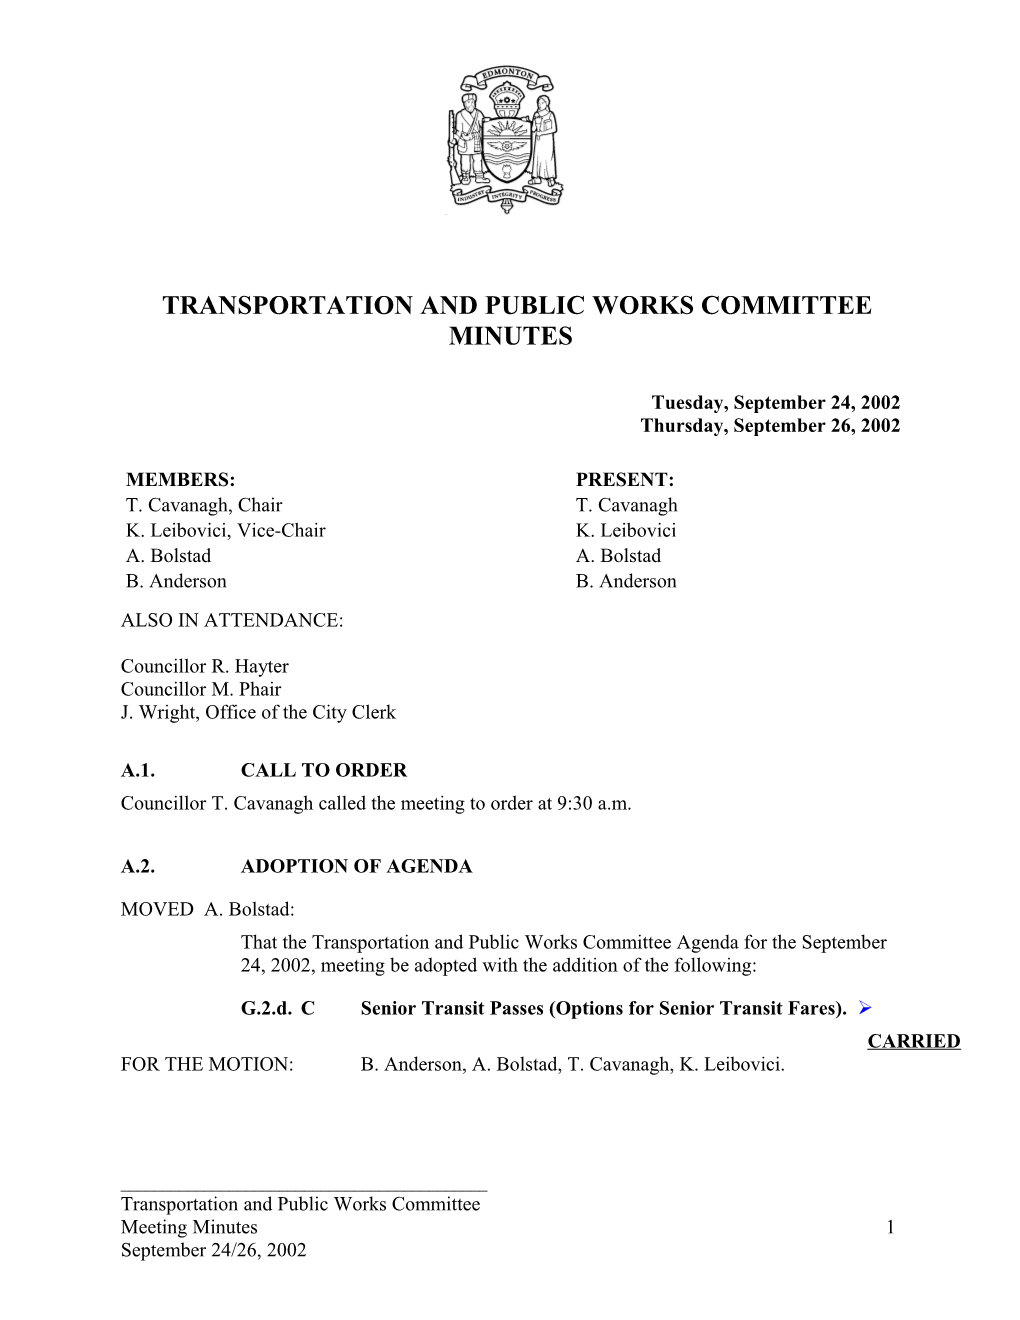 Minutes for Transportation and Public Works Committee September 24, 2002 Meeting